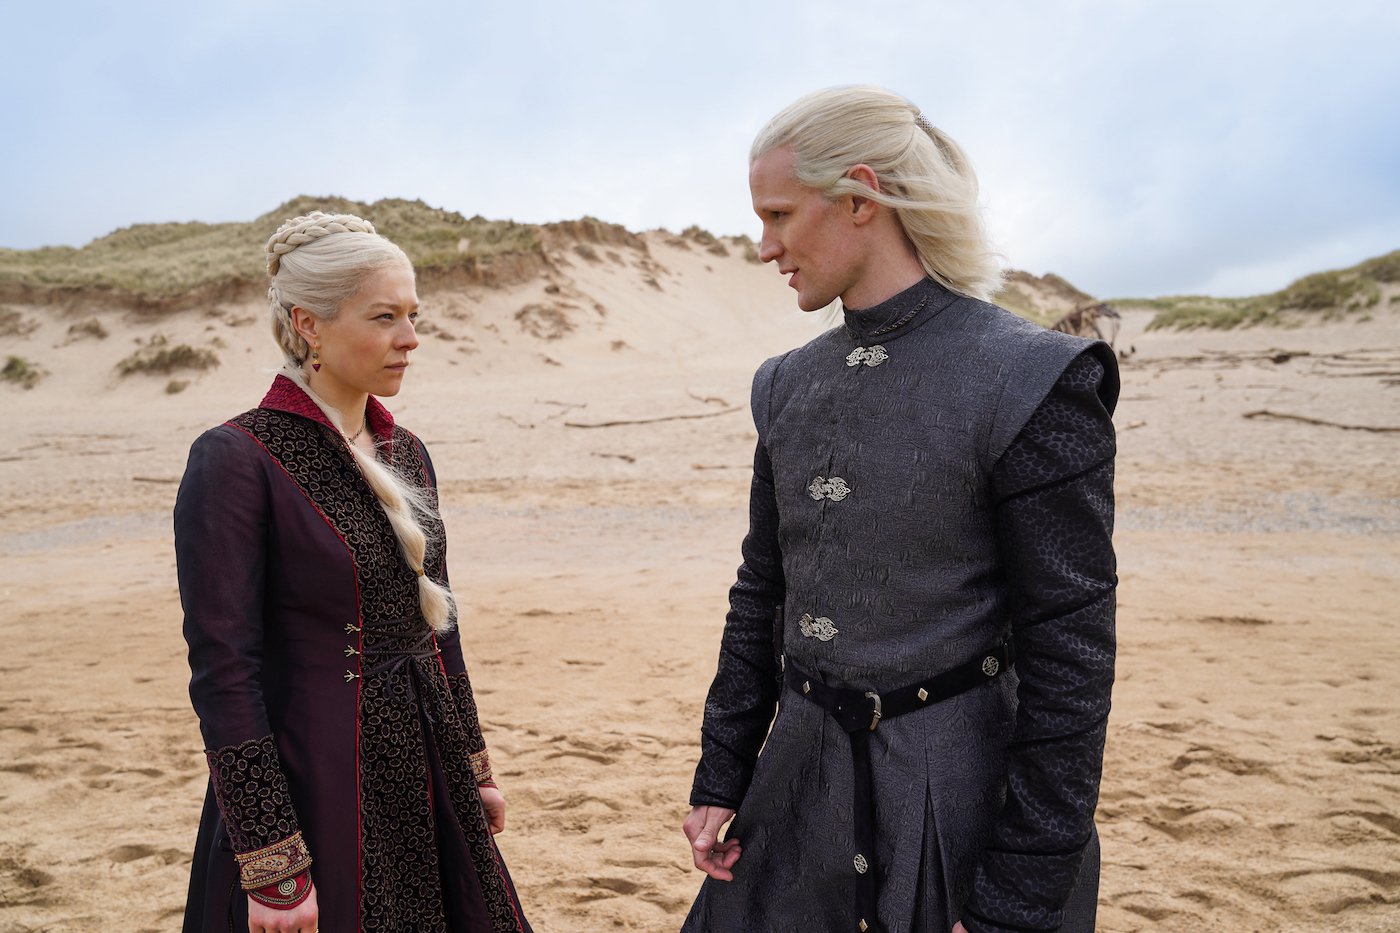 House of the Dragon Matt Smith as Prince Daemon Targaryen and Emma D’Arcy as Princess Rhaenyra Targaryen in a production still from the upcoming Game of Thrones prequel